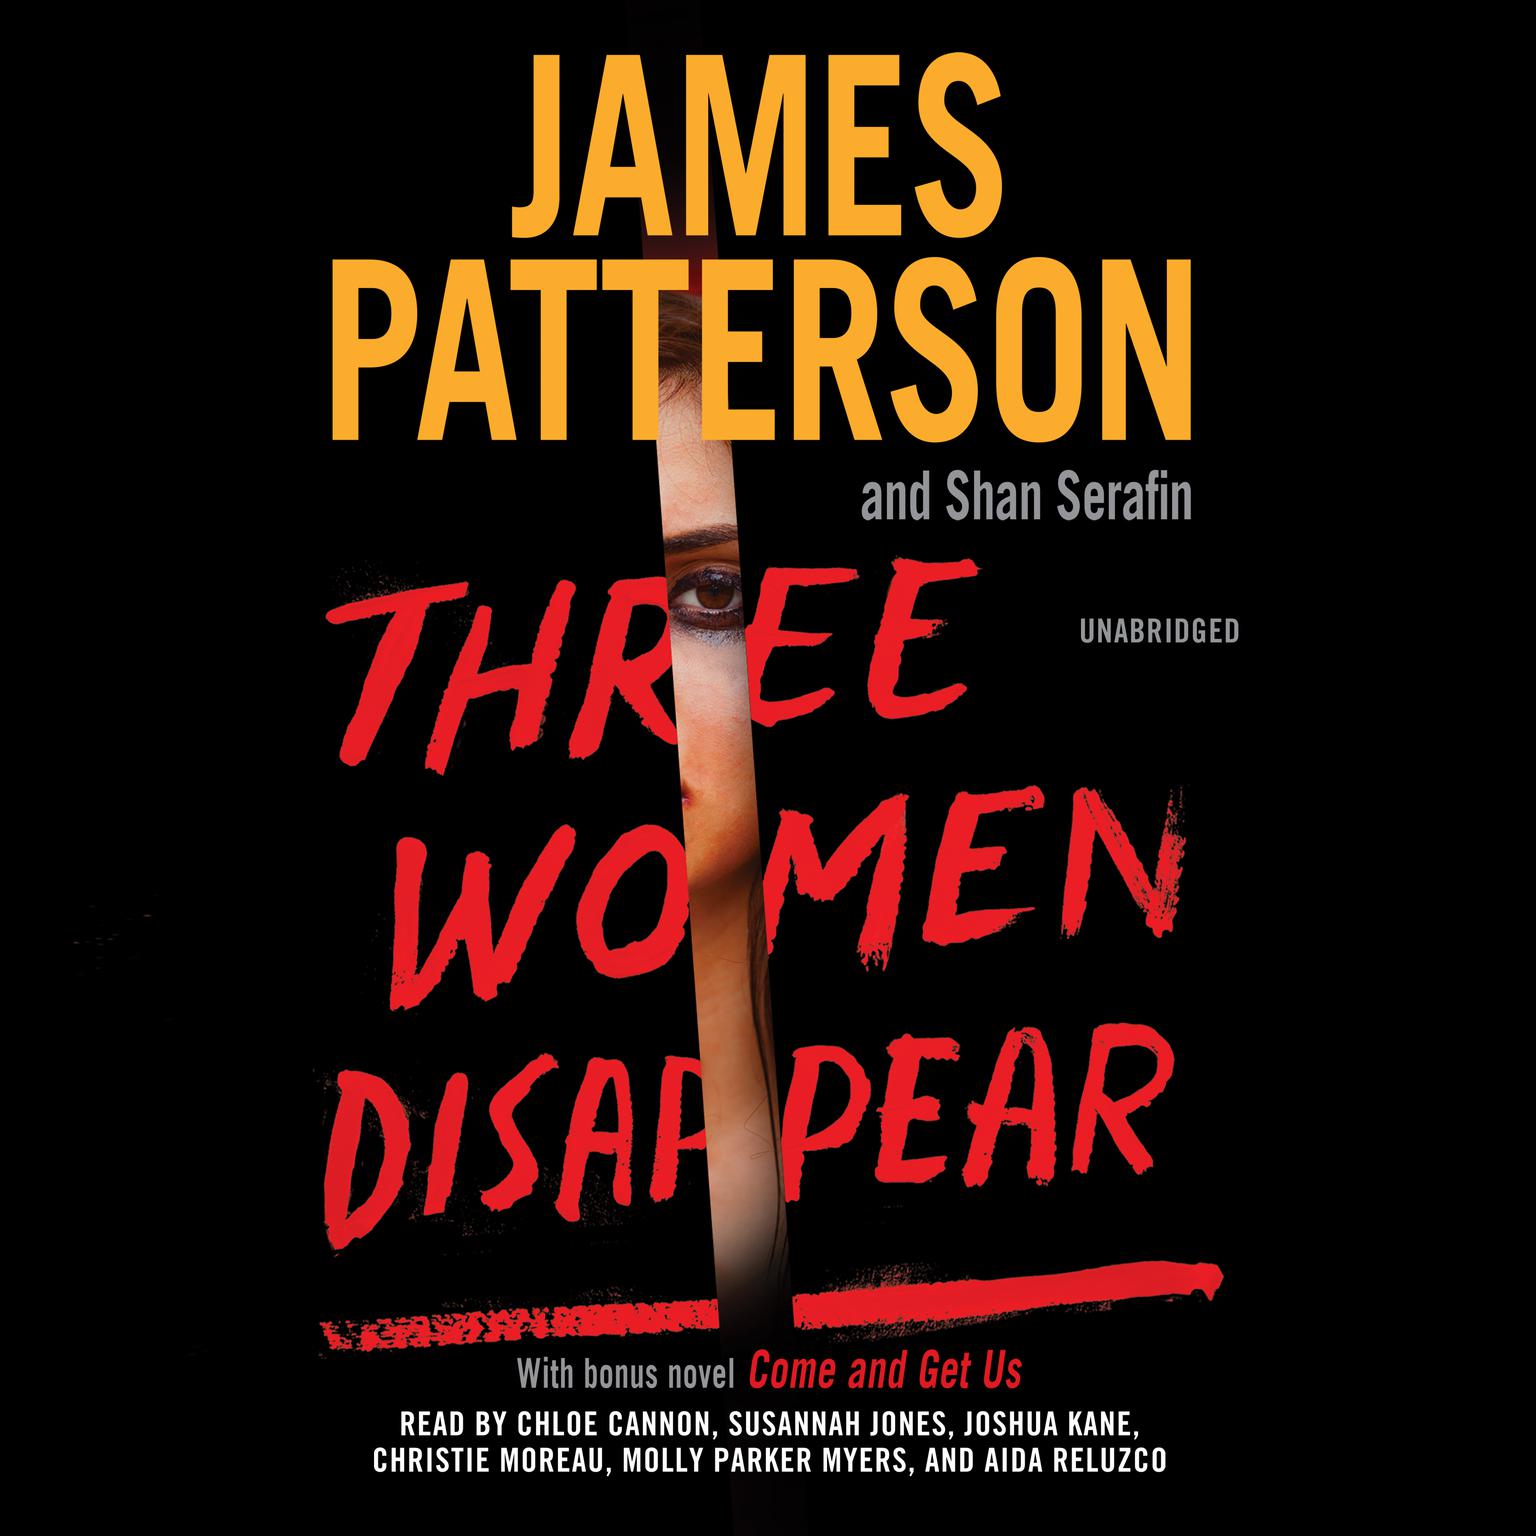 Three Women Disappear: with bonus novel Come and Get Us Audiobook, by James Patterson